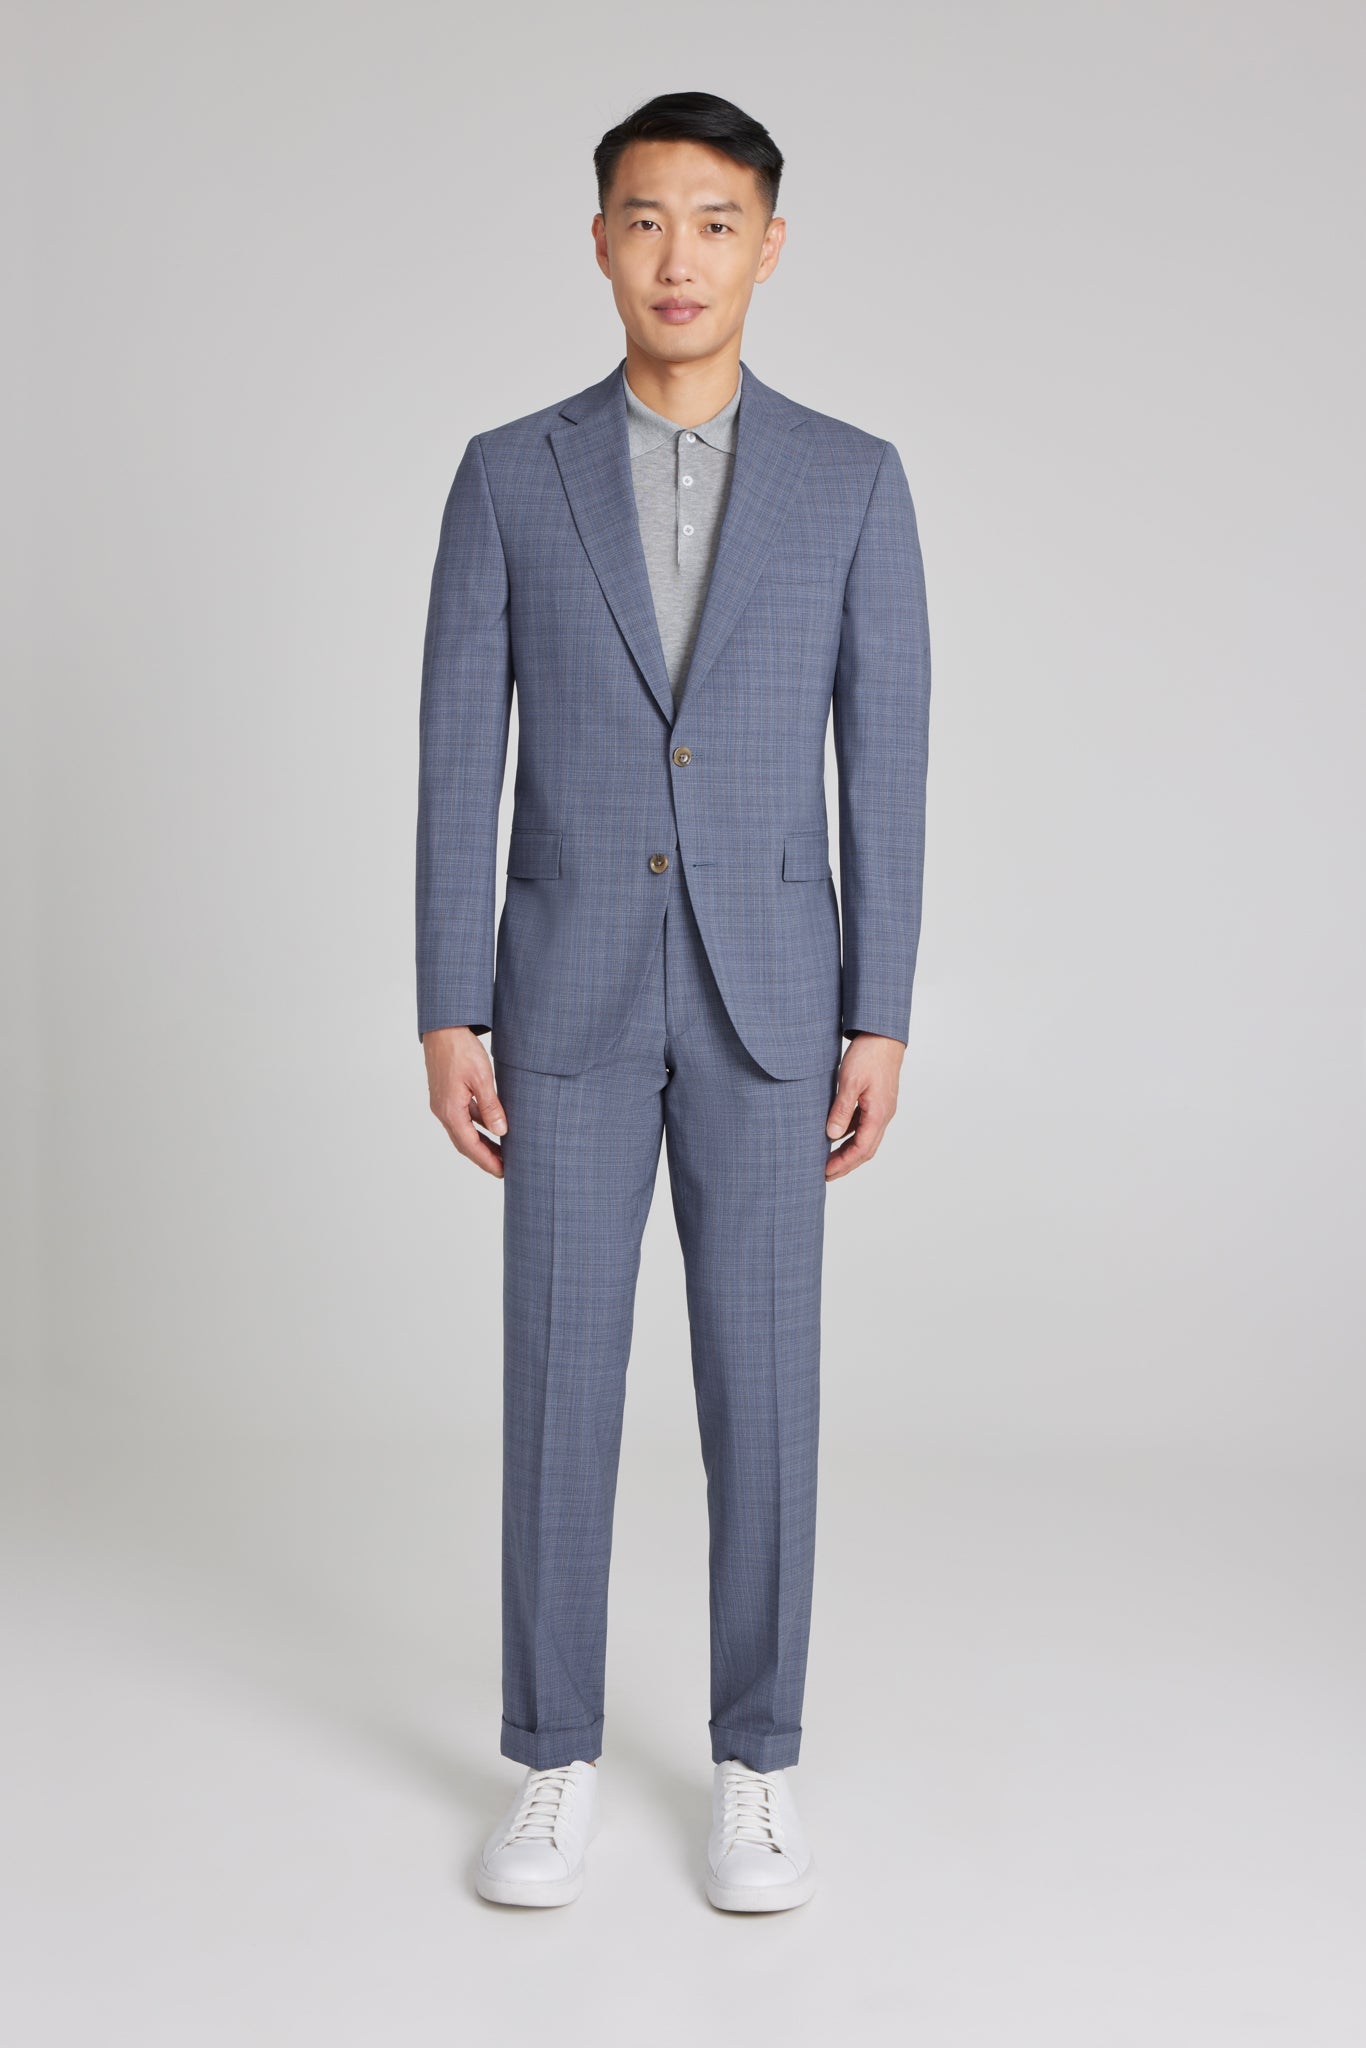 Blue and Grey Neat Esprit Wool Stretch Suit